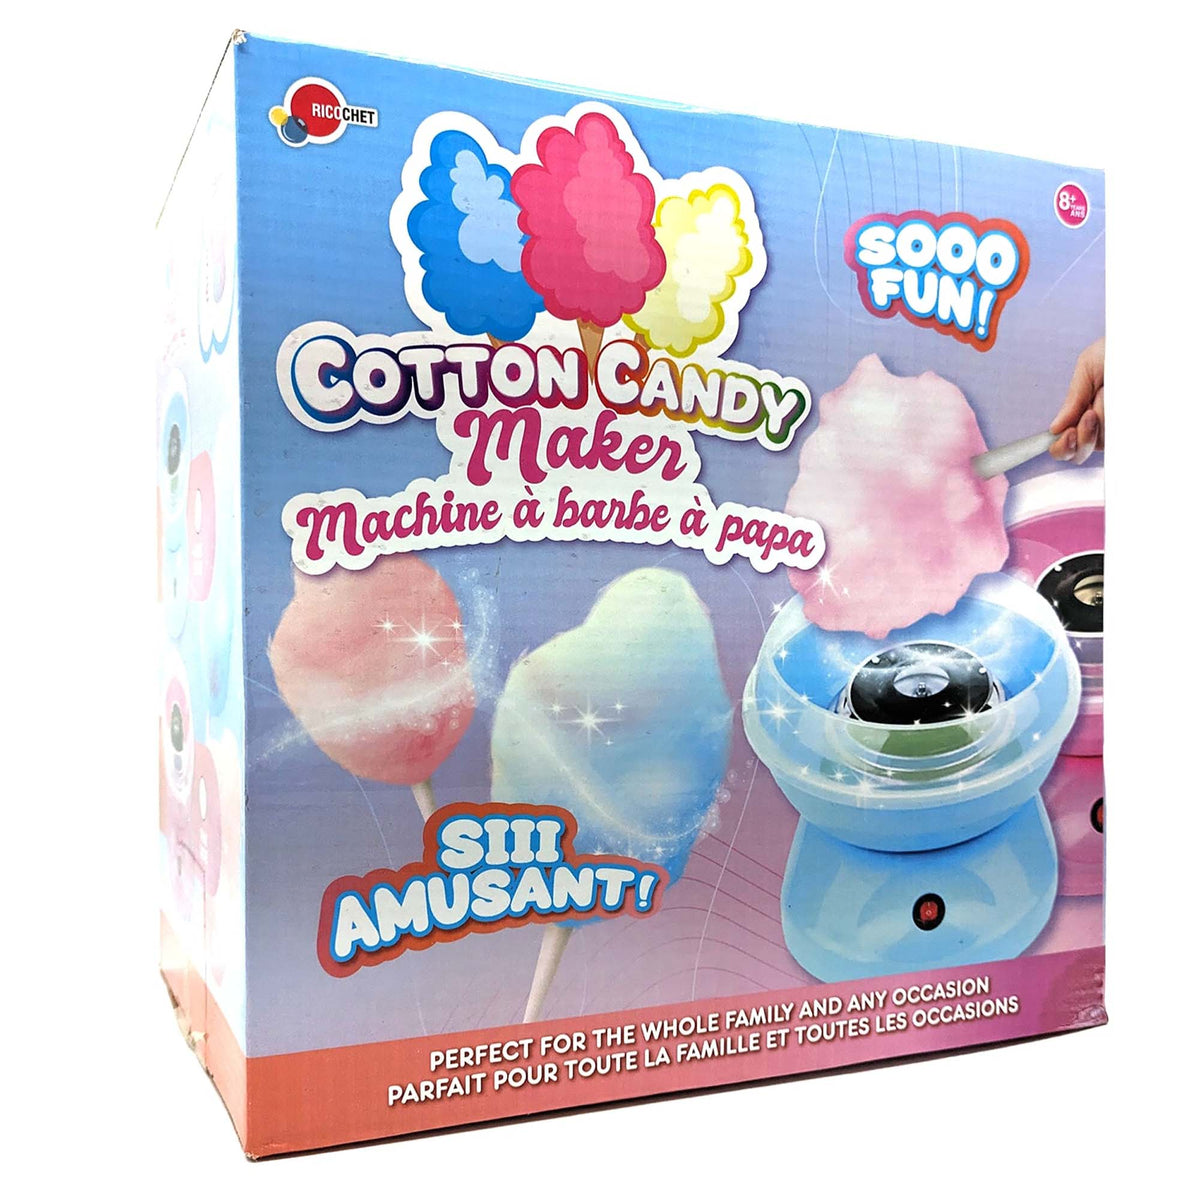 GROUPE RICOCHET Candy Bar Cotton Candy Maker, 1 Count